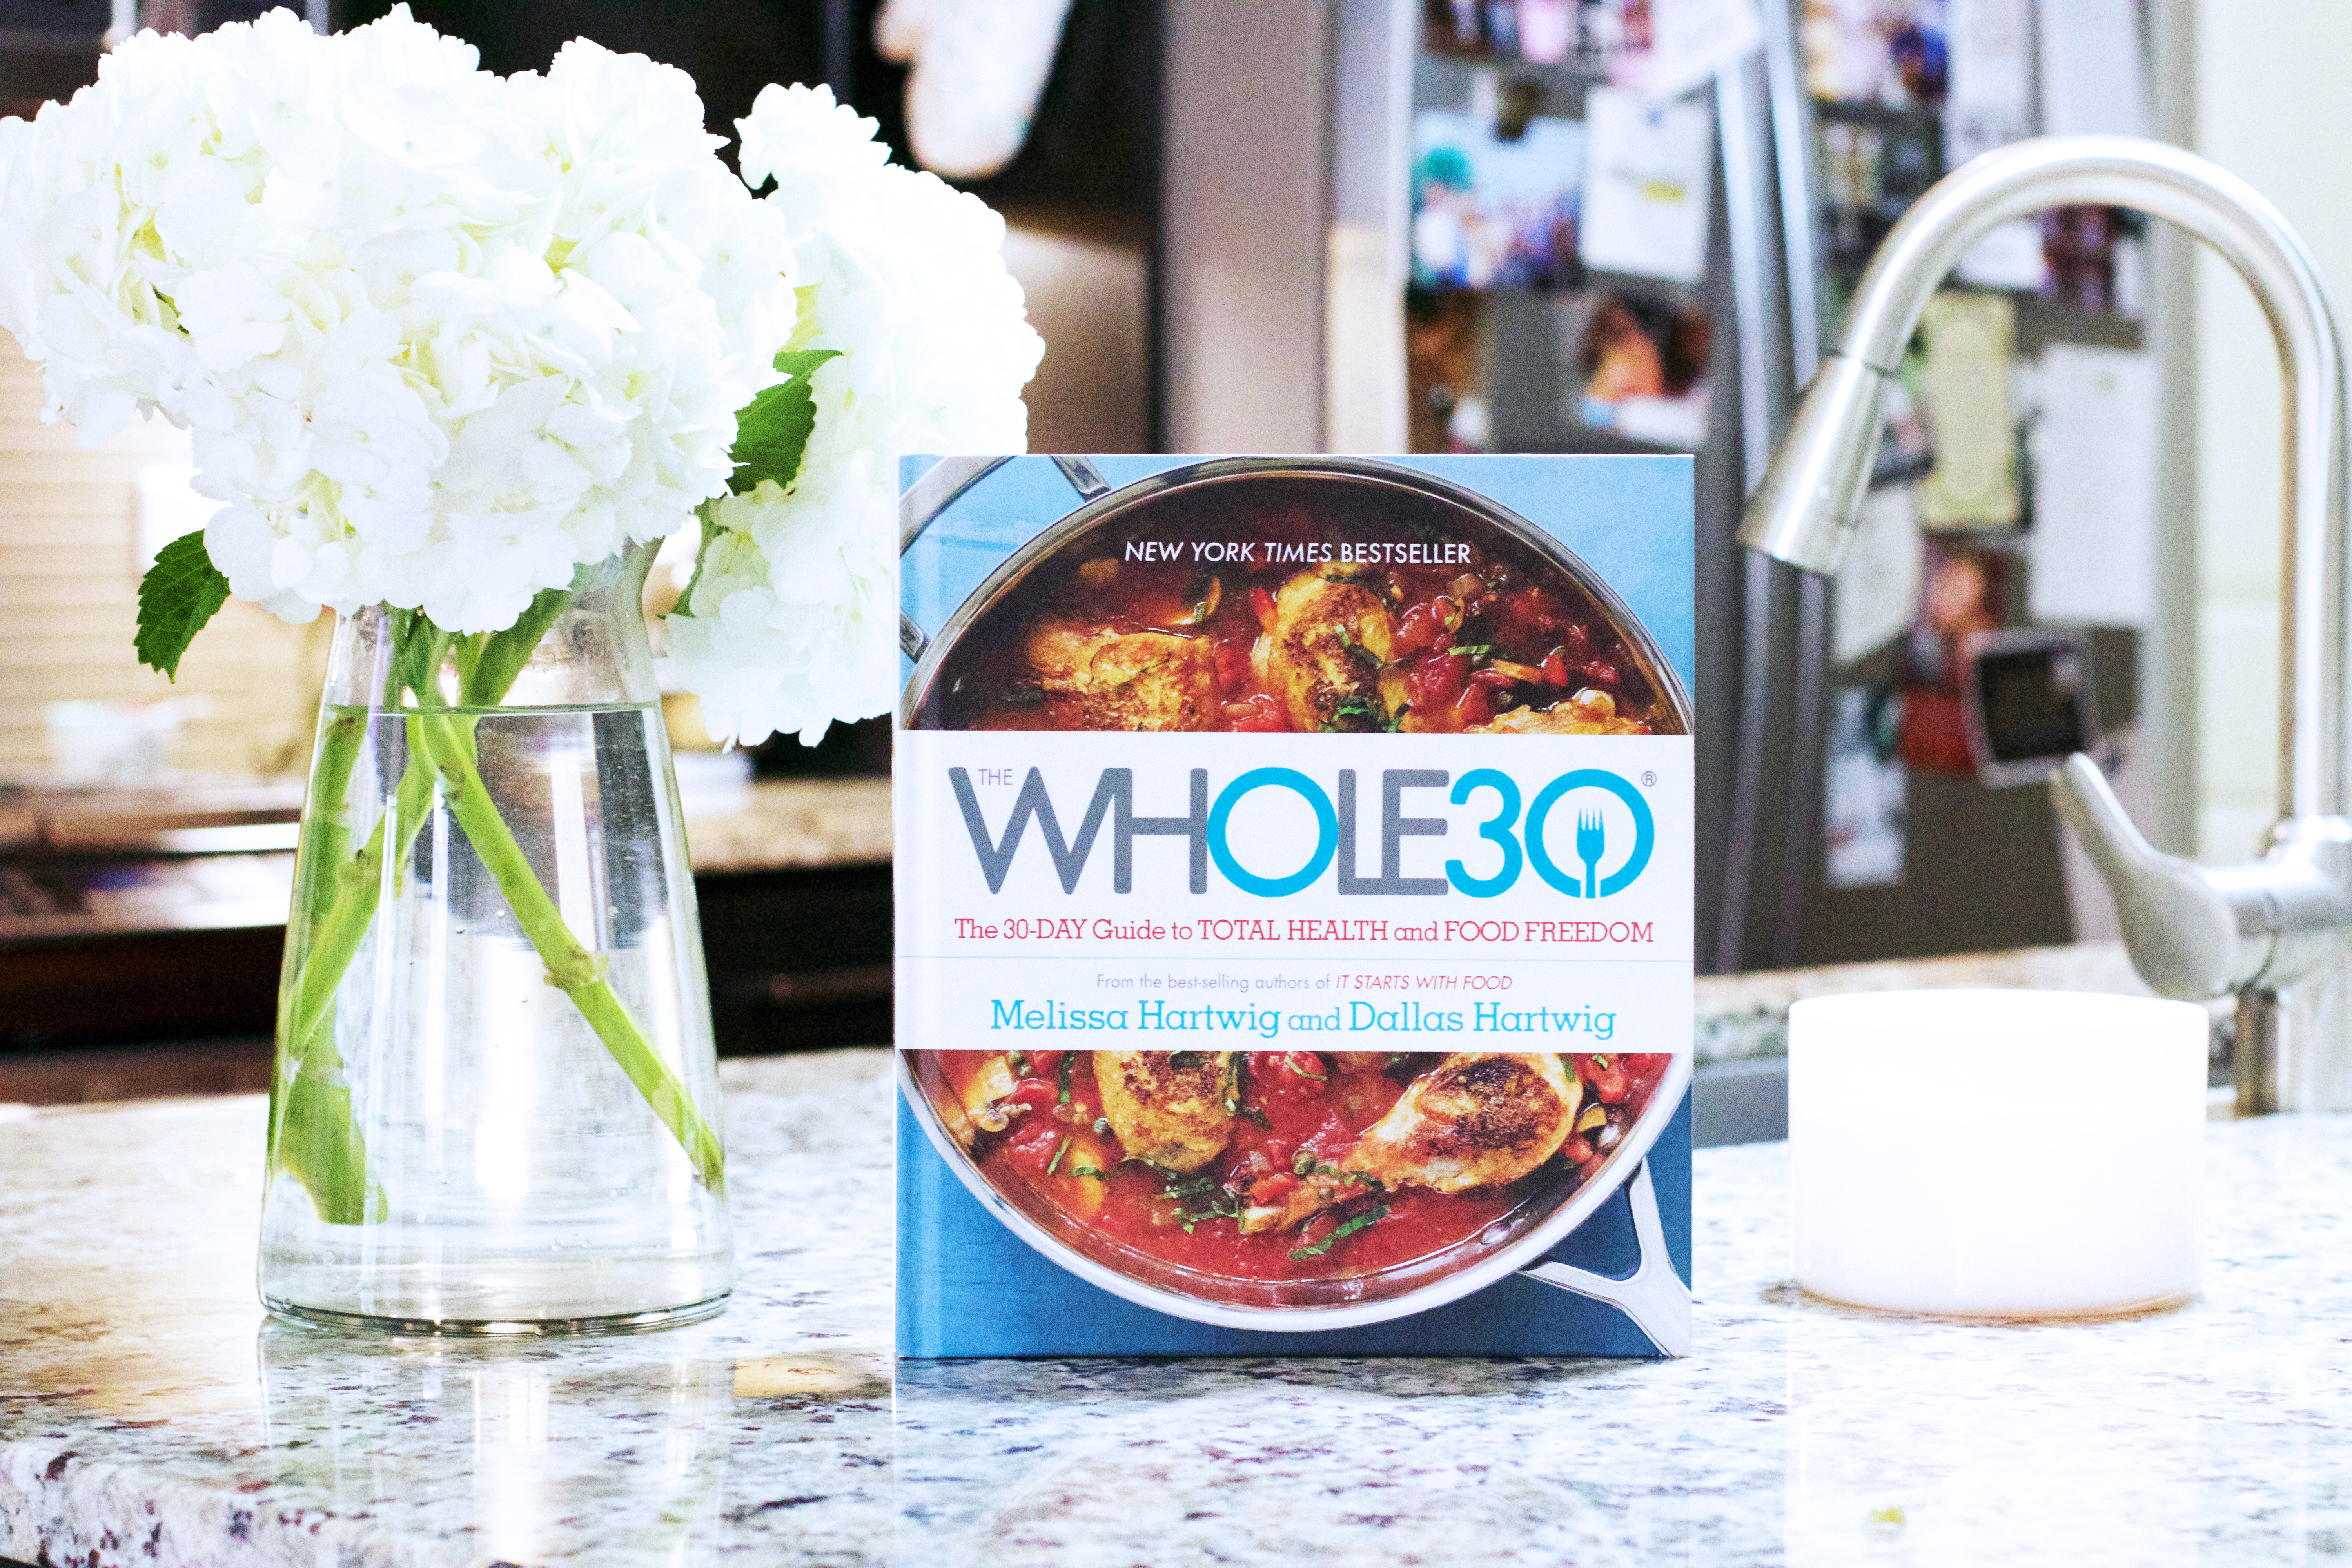 Why I am Doing The Whole 30